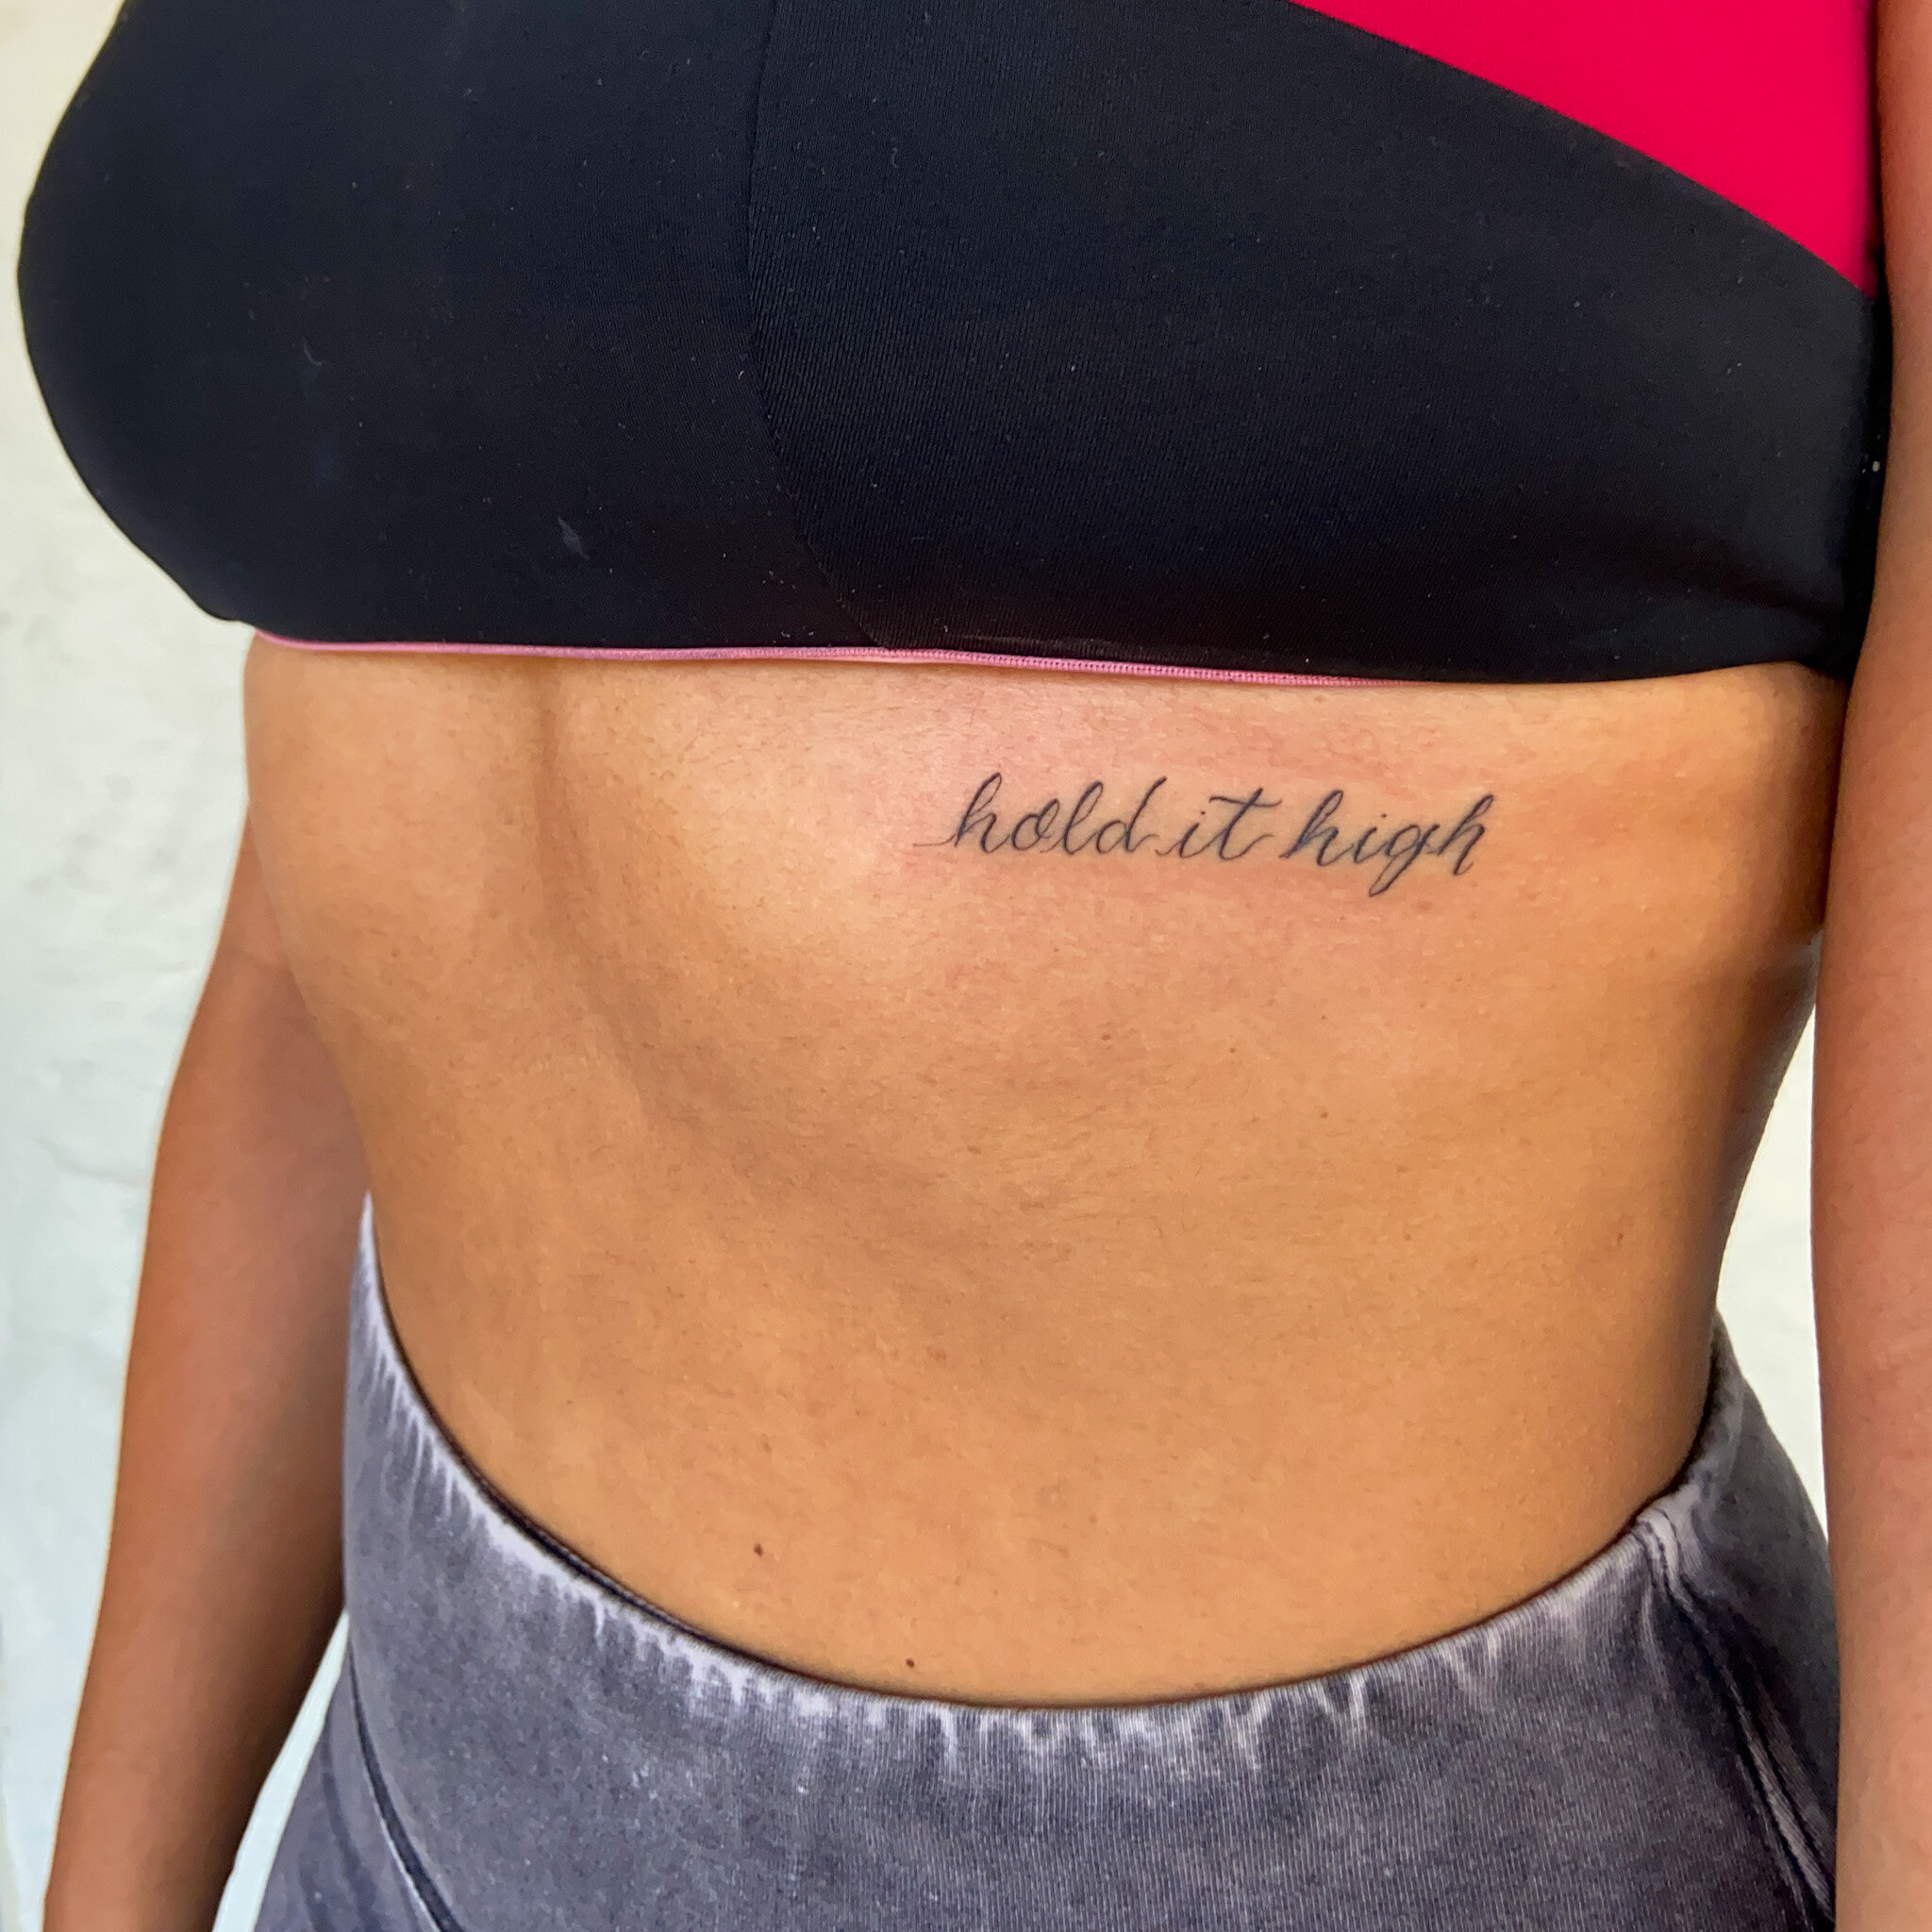  small script tattoo that says "hold it high" along a woman's ribcage 